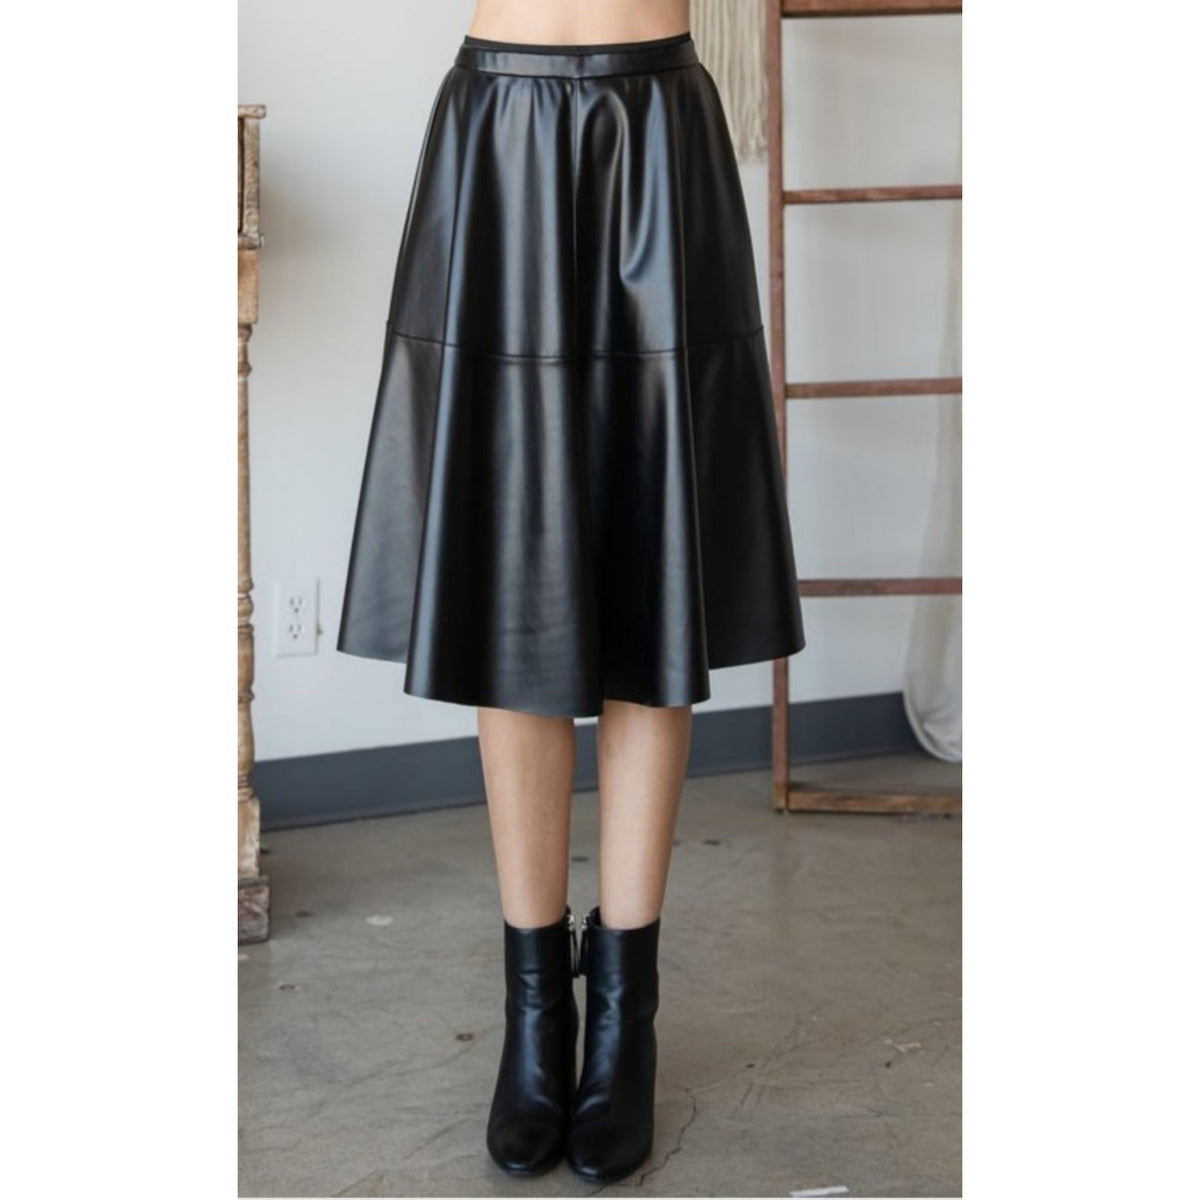 Women's Black Leather A-Line Skirt - Lookeble